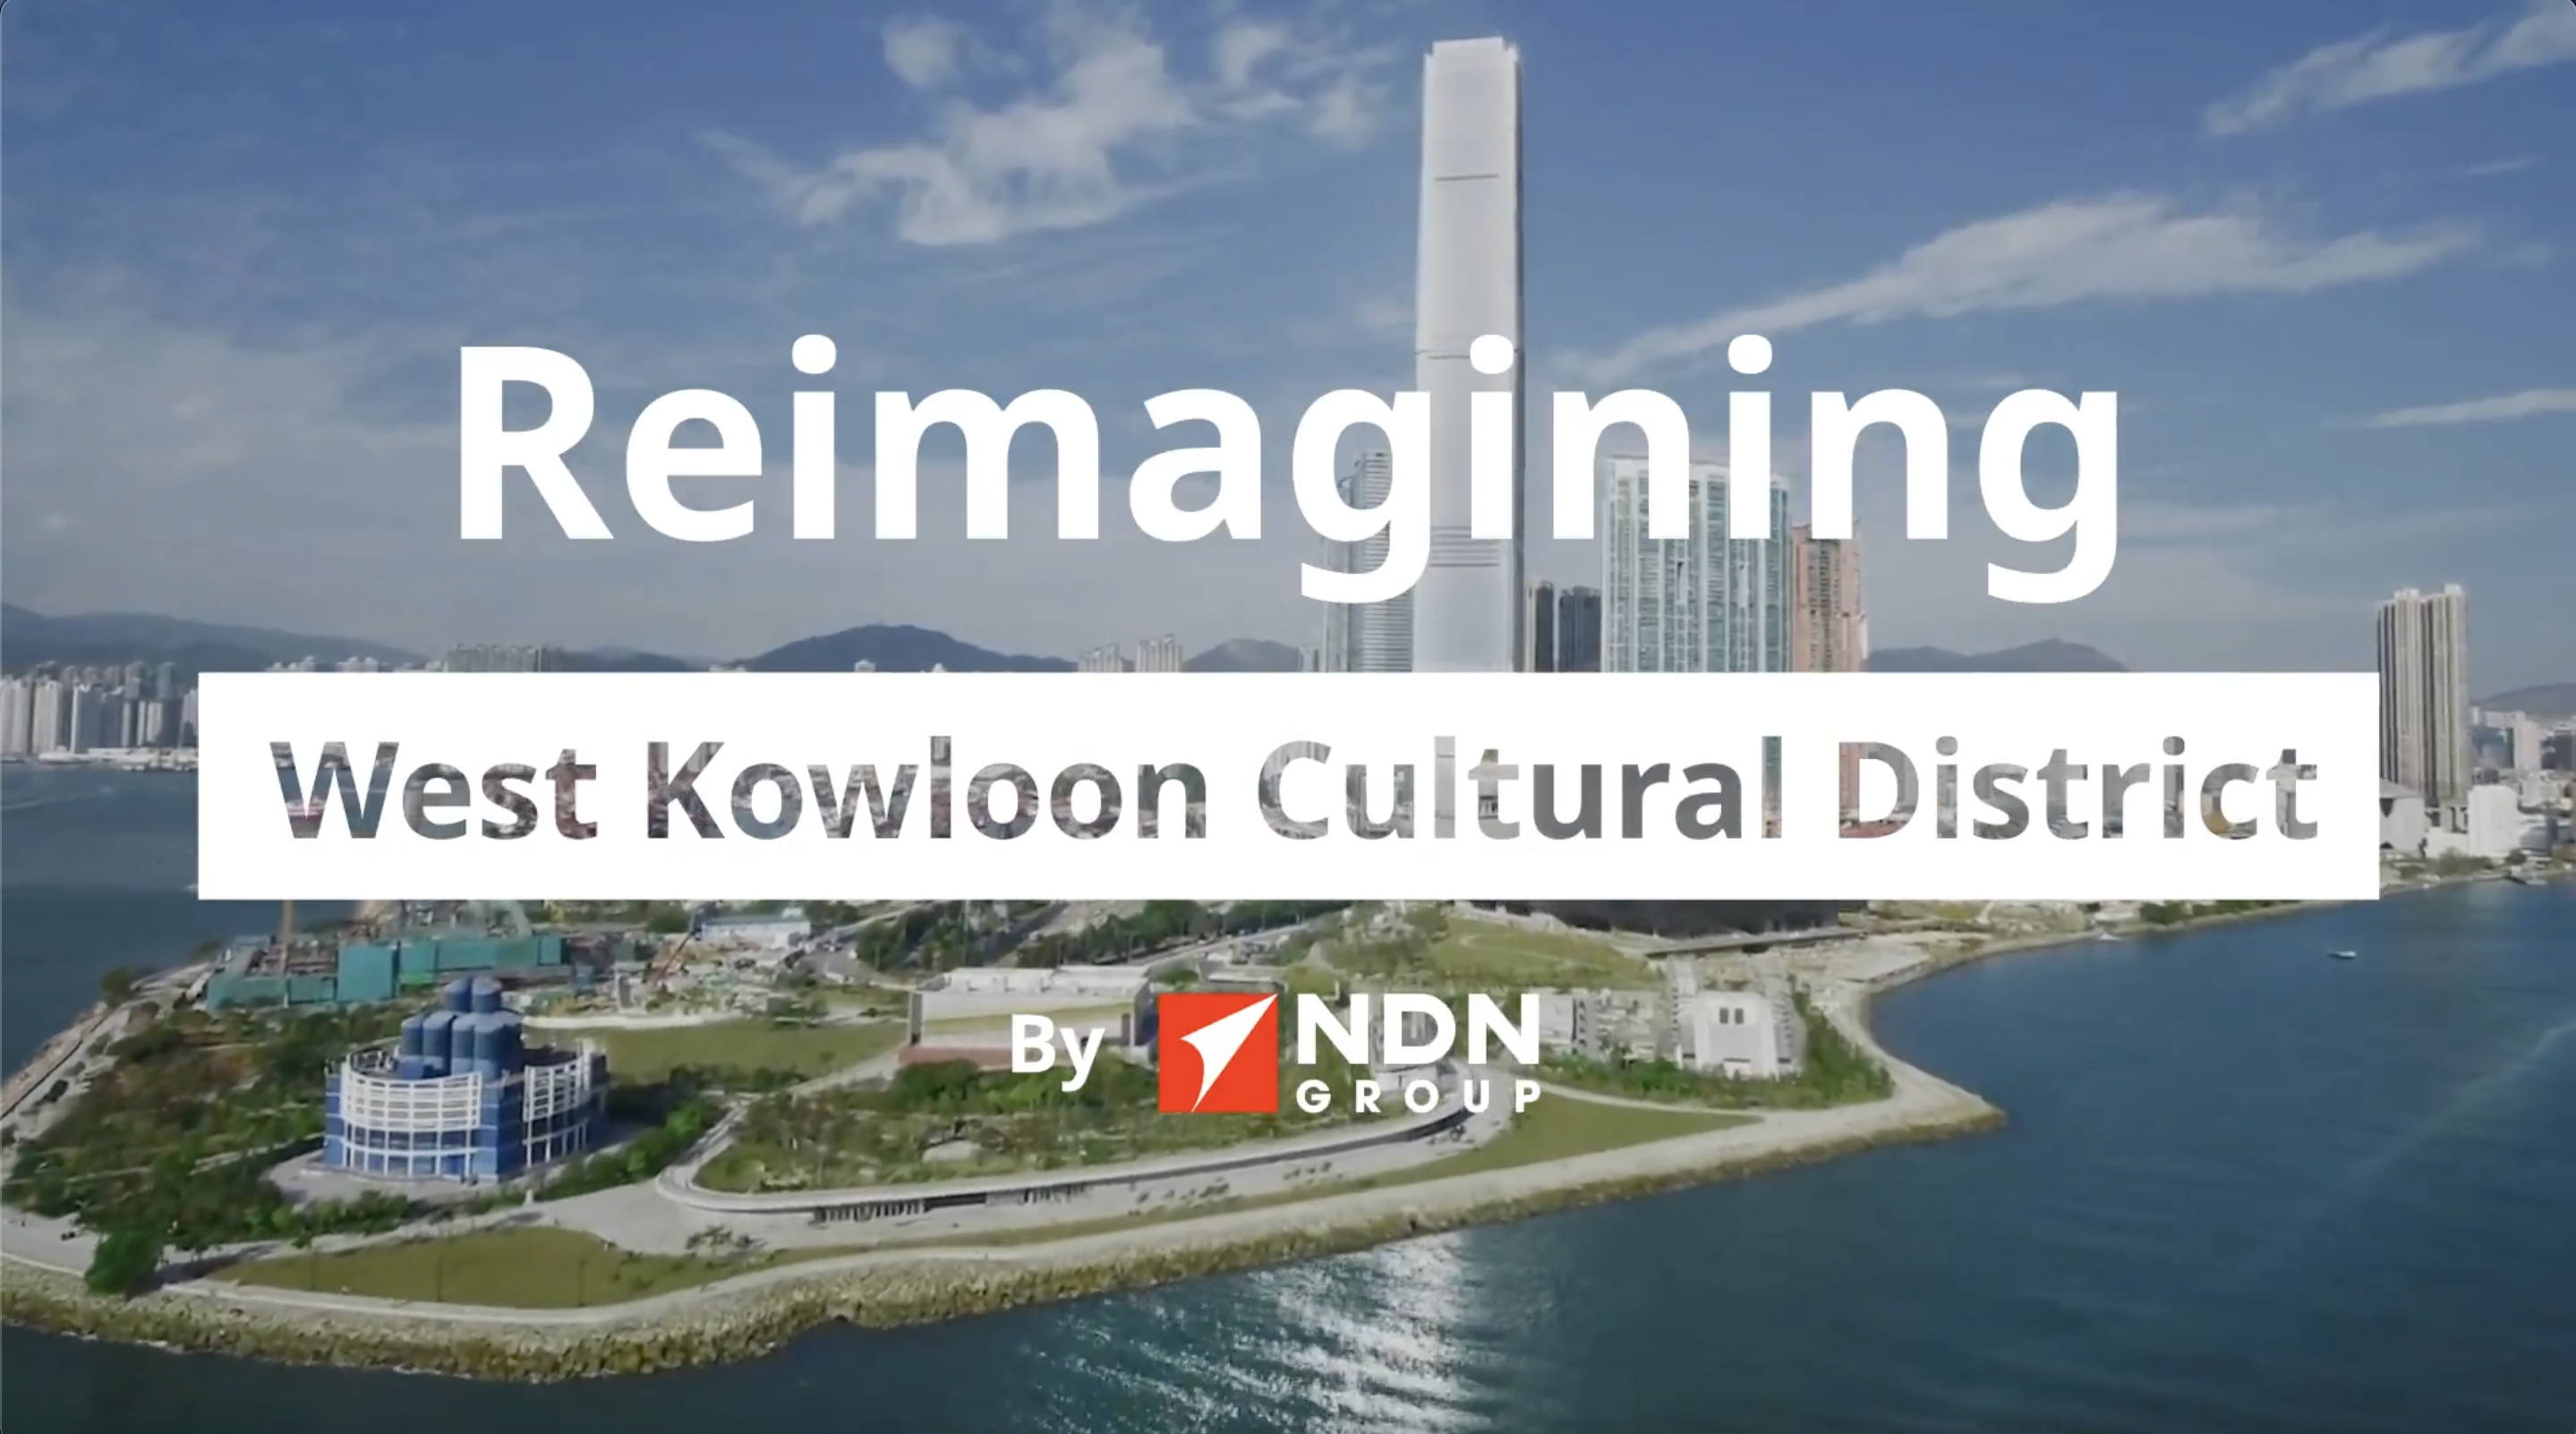 West Kowloon Cultural District by NDN